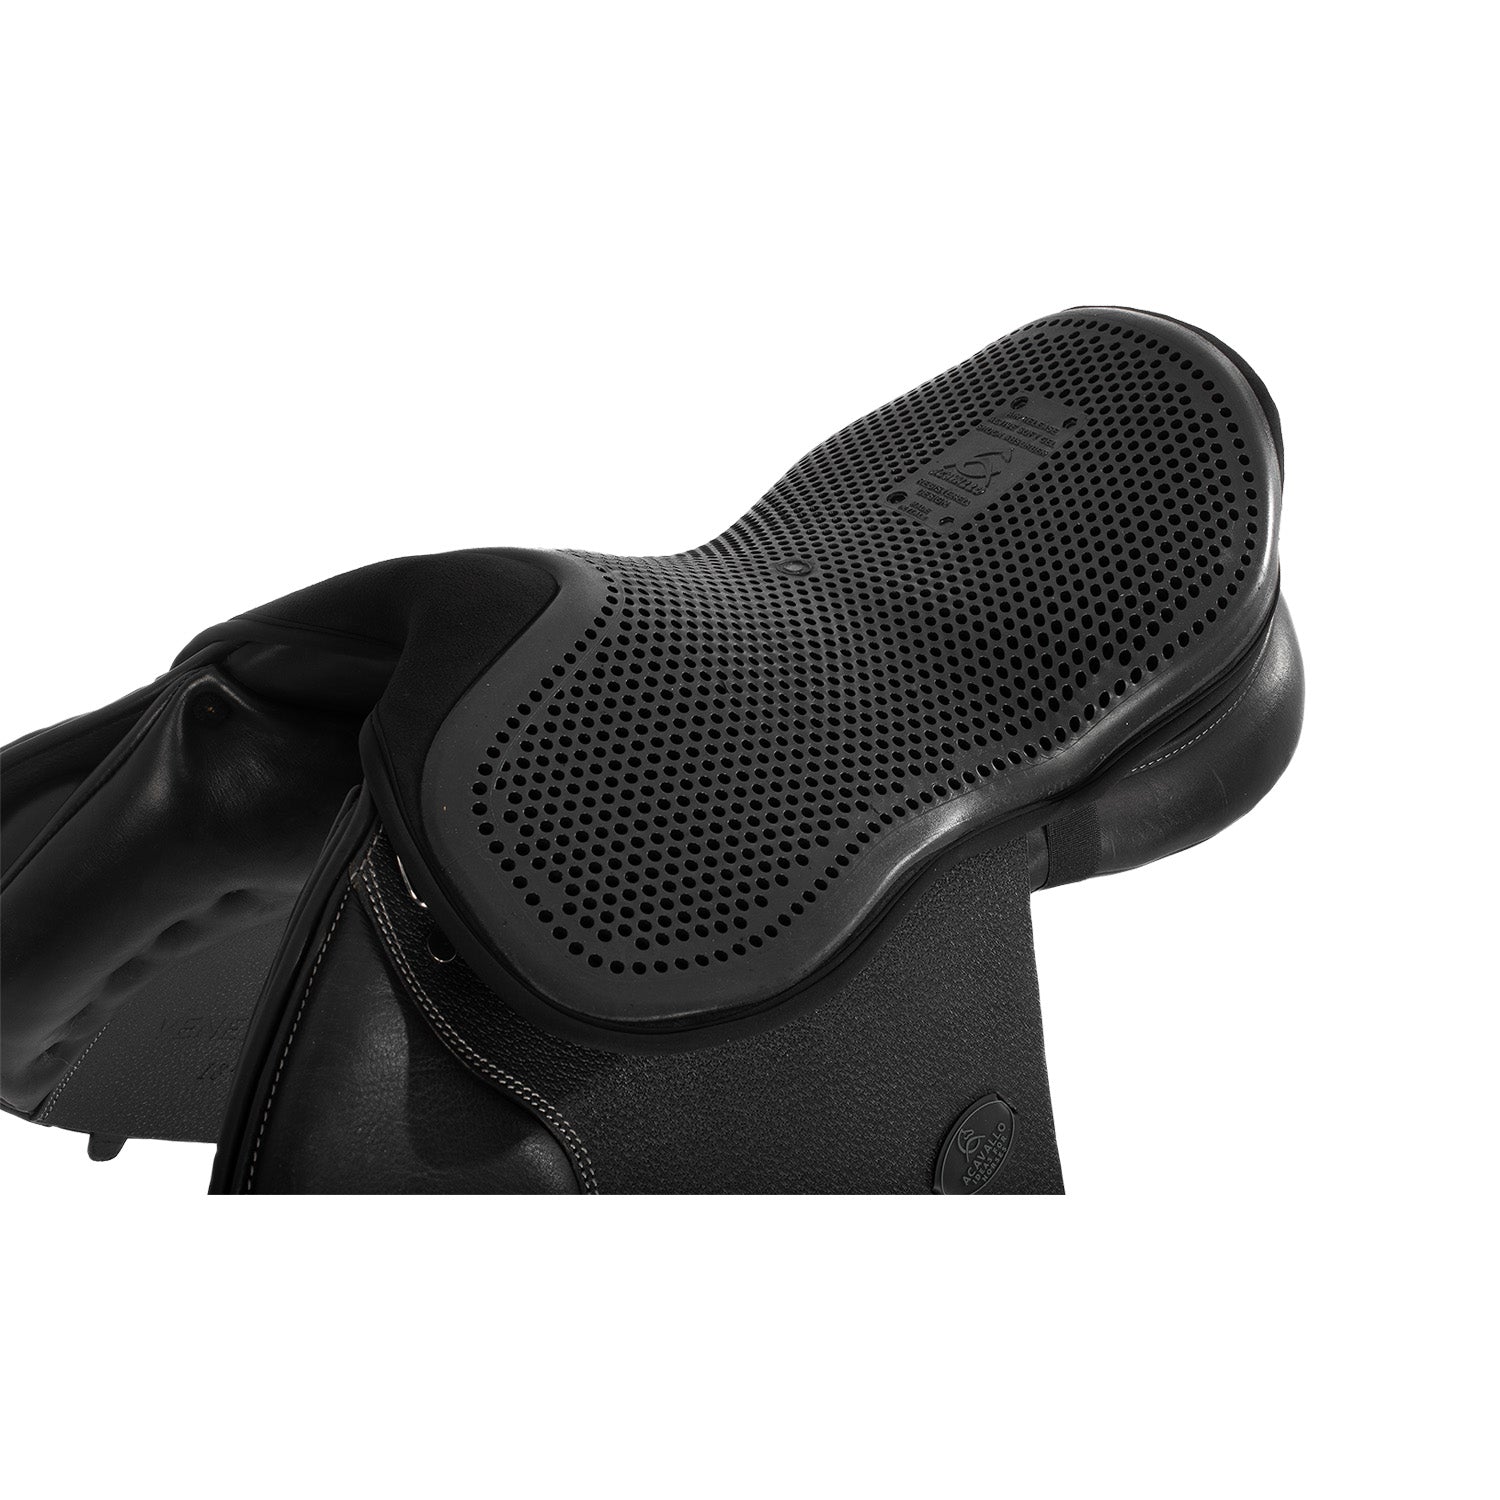 Gel saddle seat cover for back pain